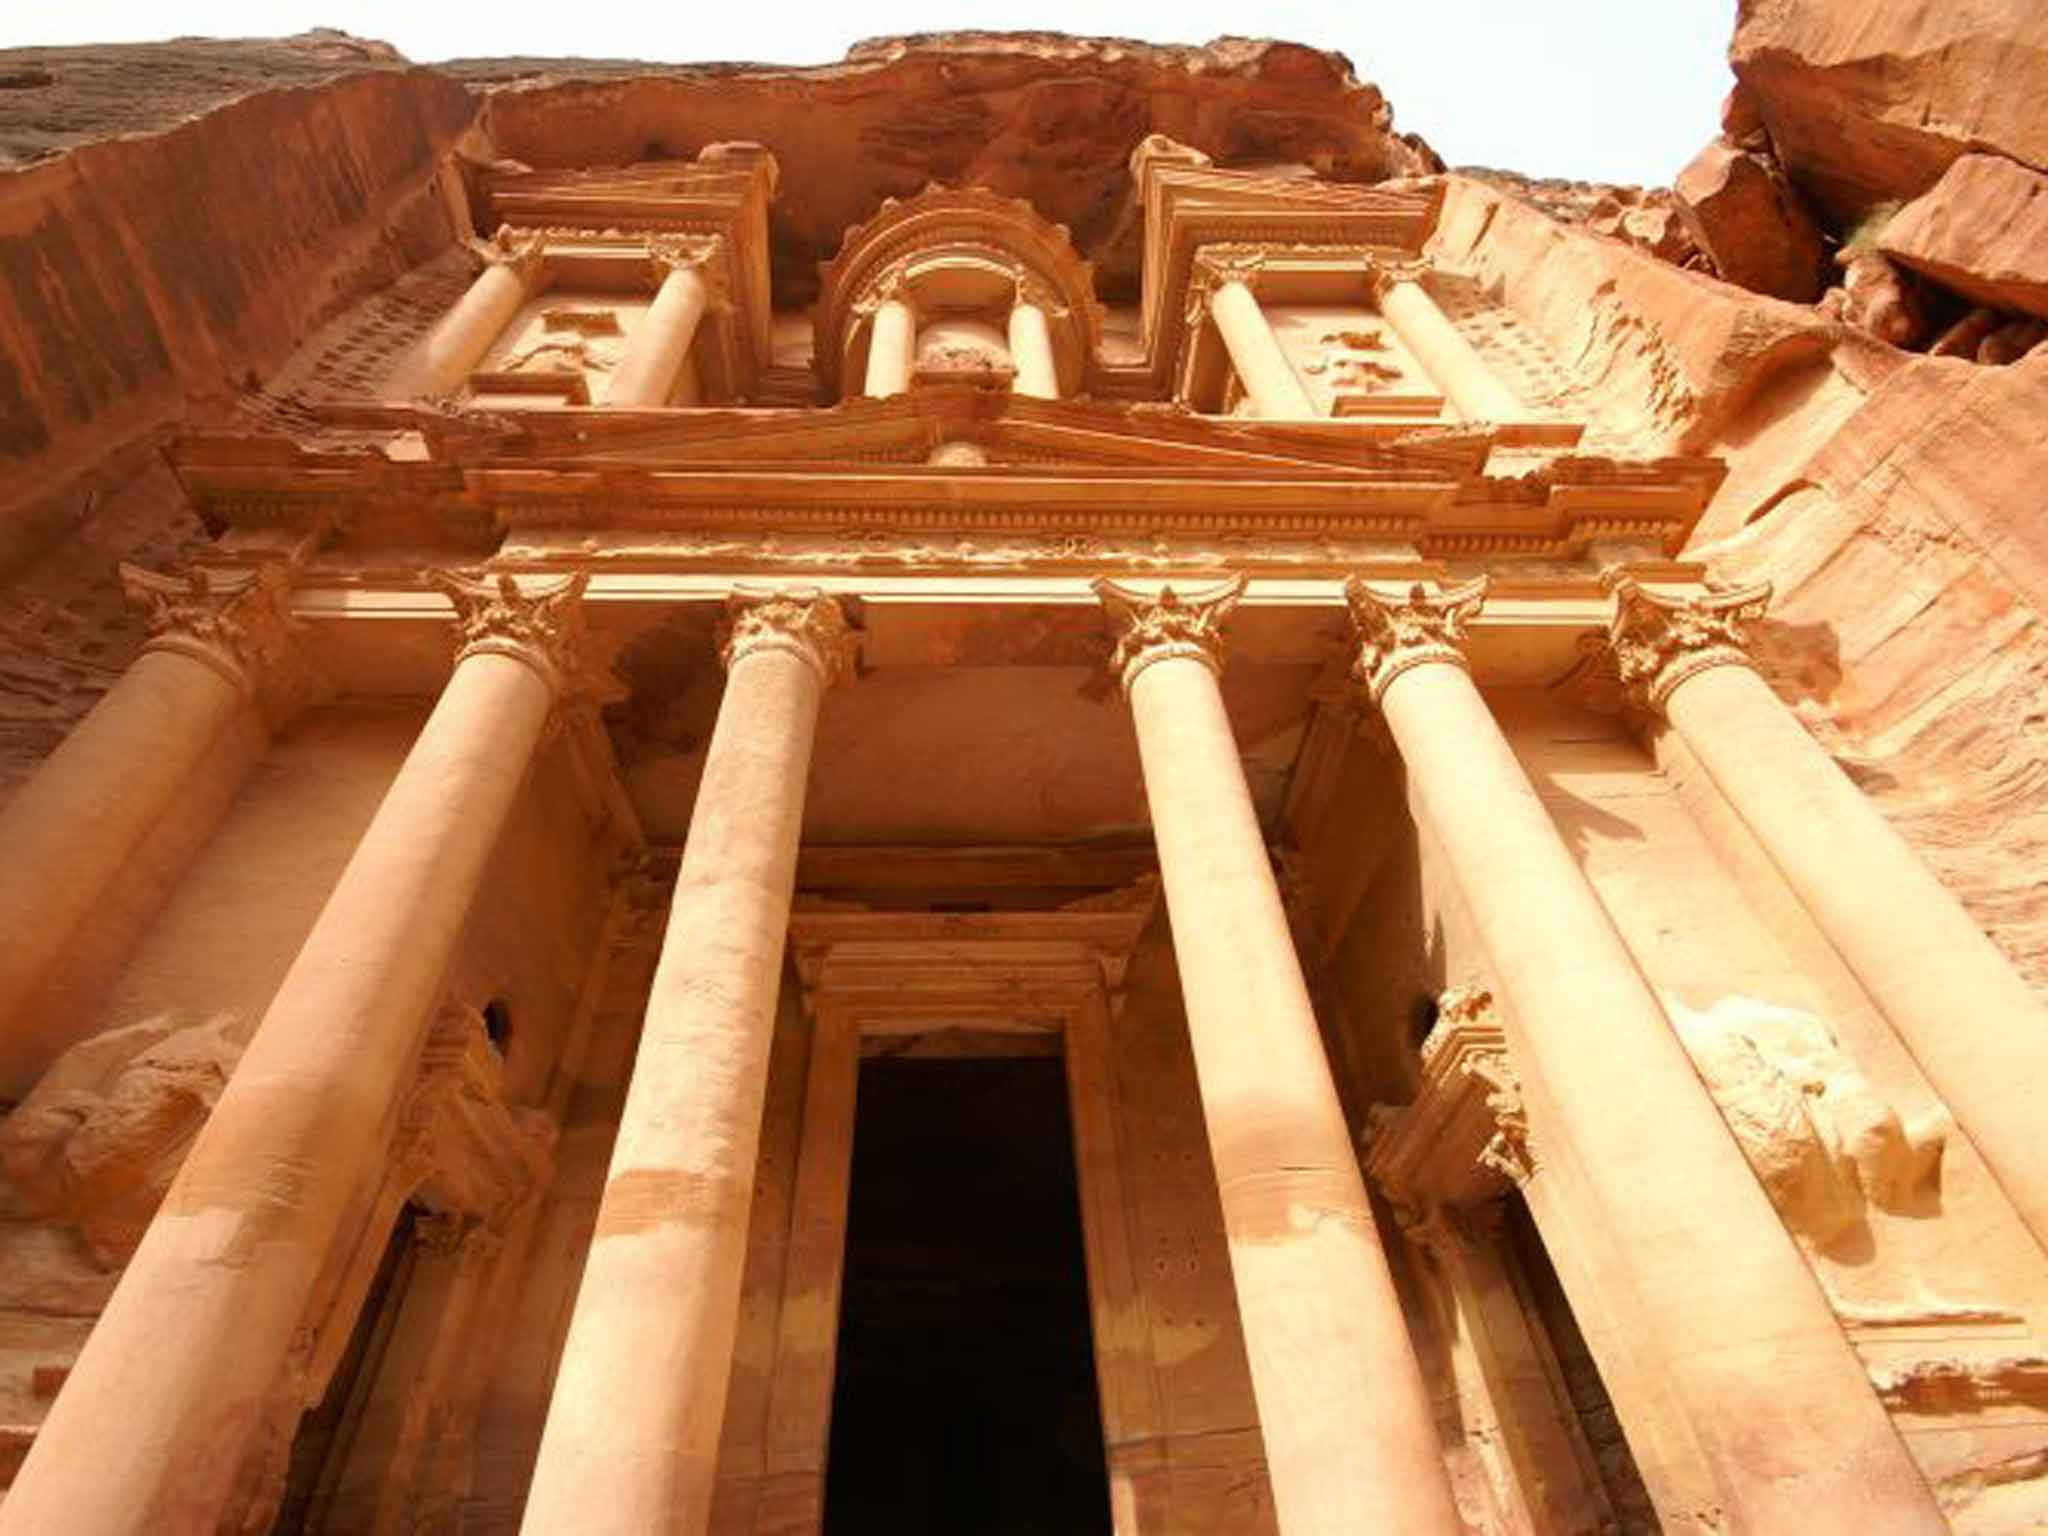 Ancient history: take a trip to Petra